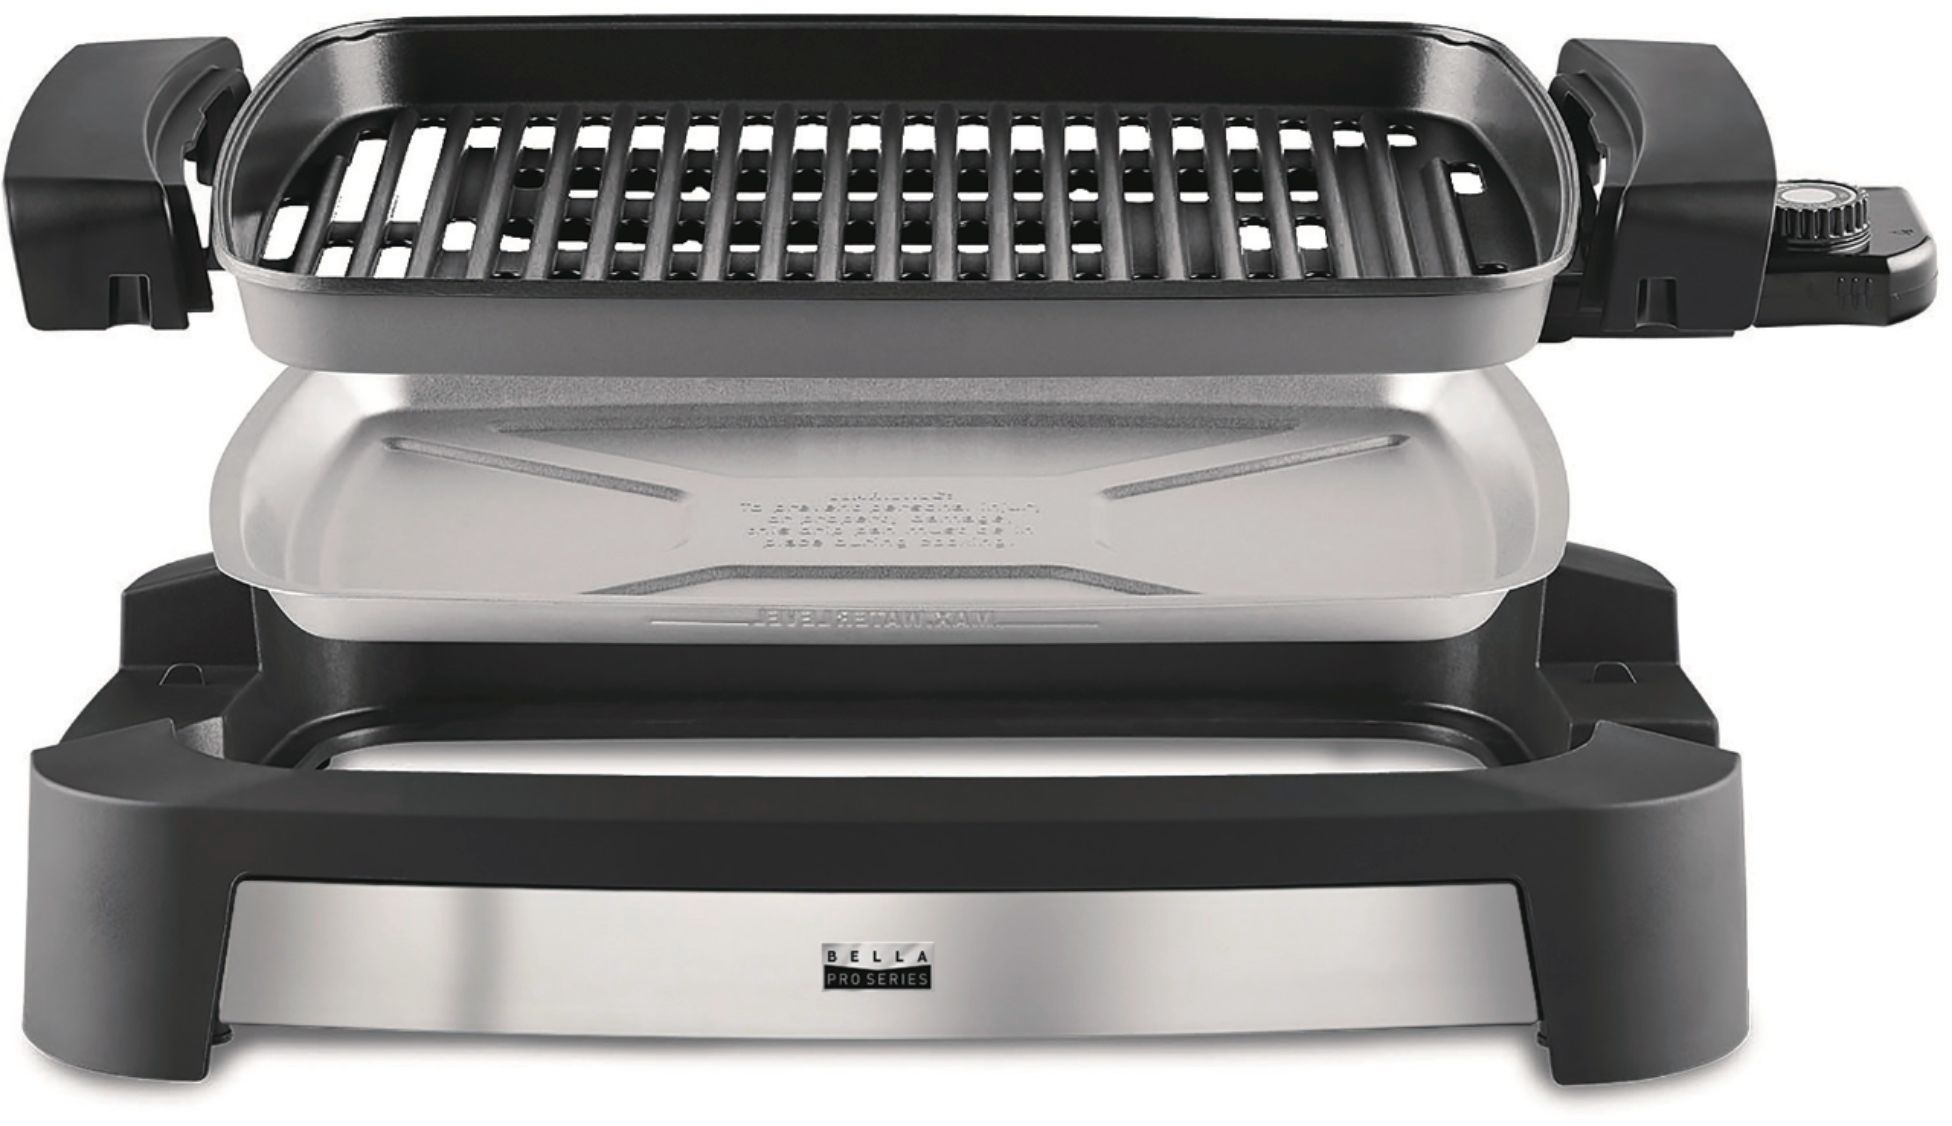 Elexnux 216 sq. in. Red Stainless Steel Smokless Indoor Grill with